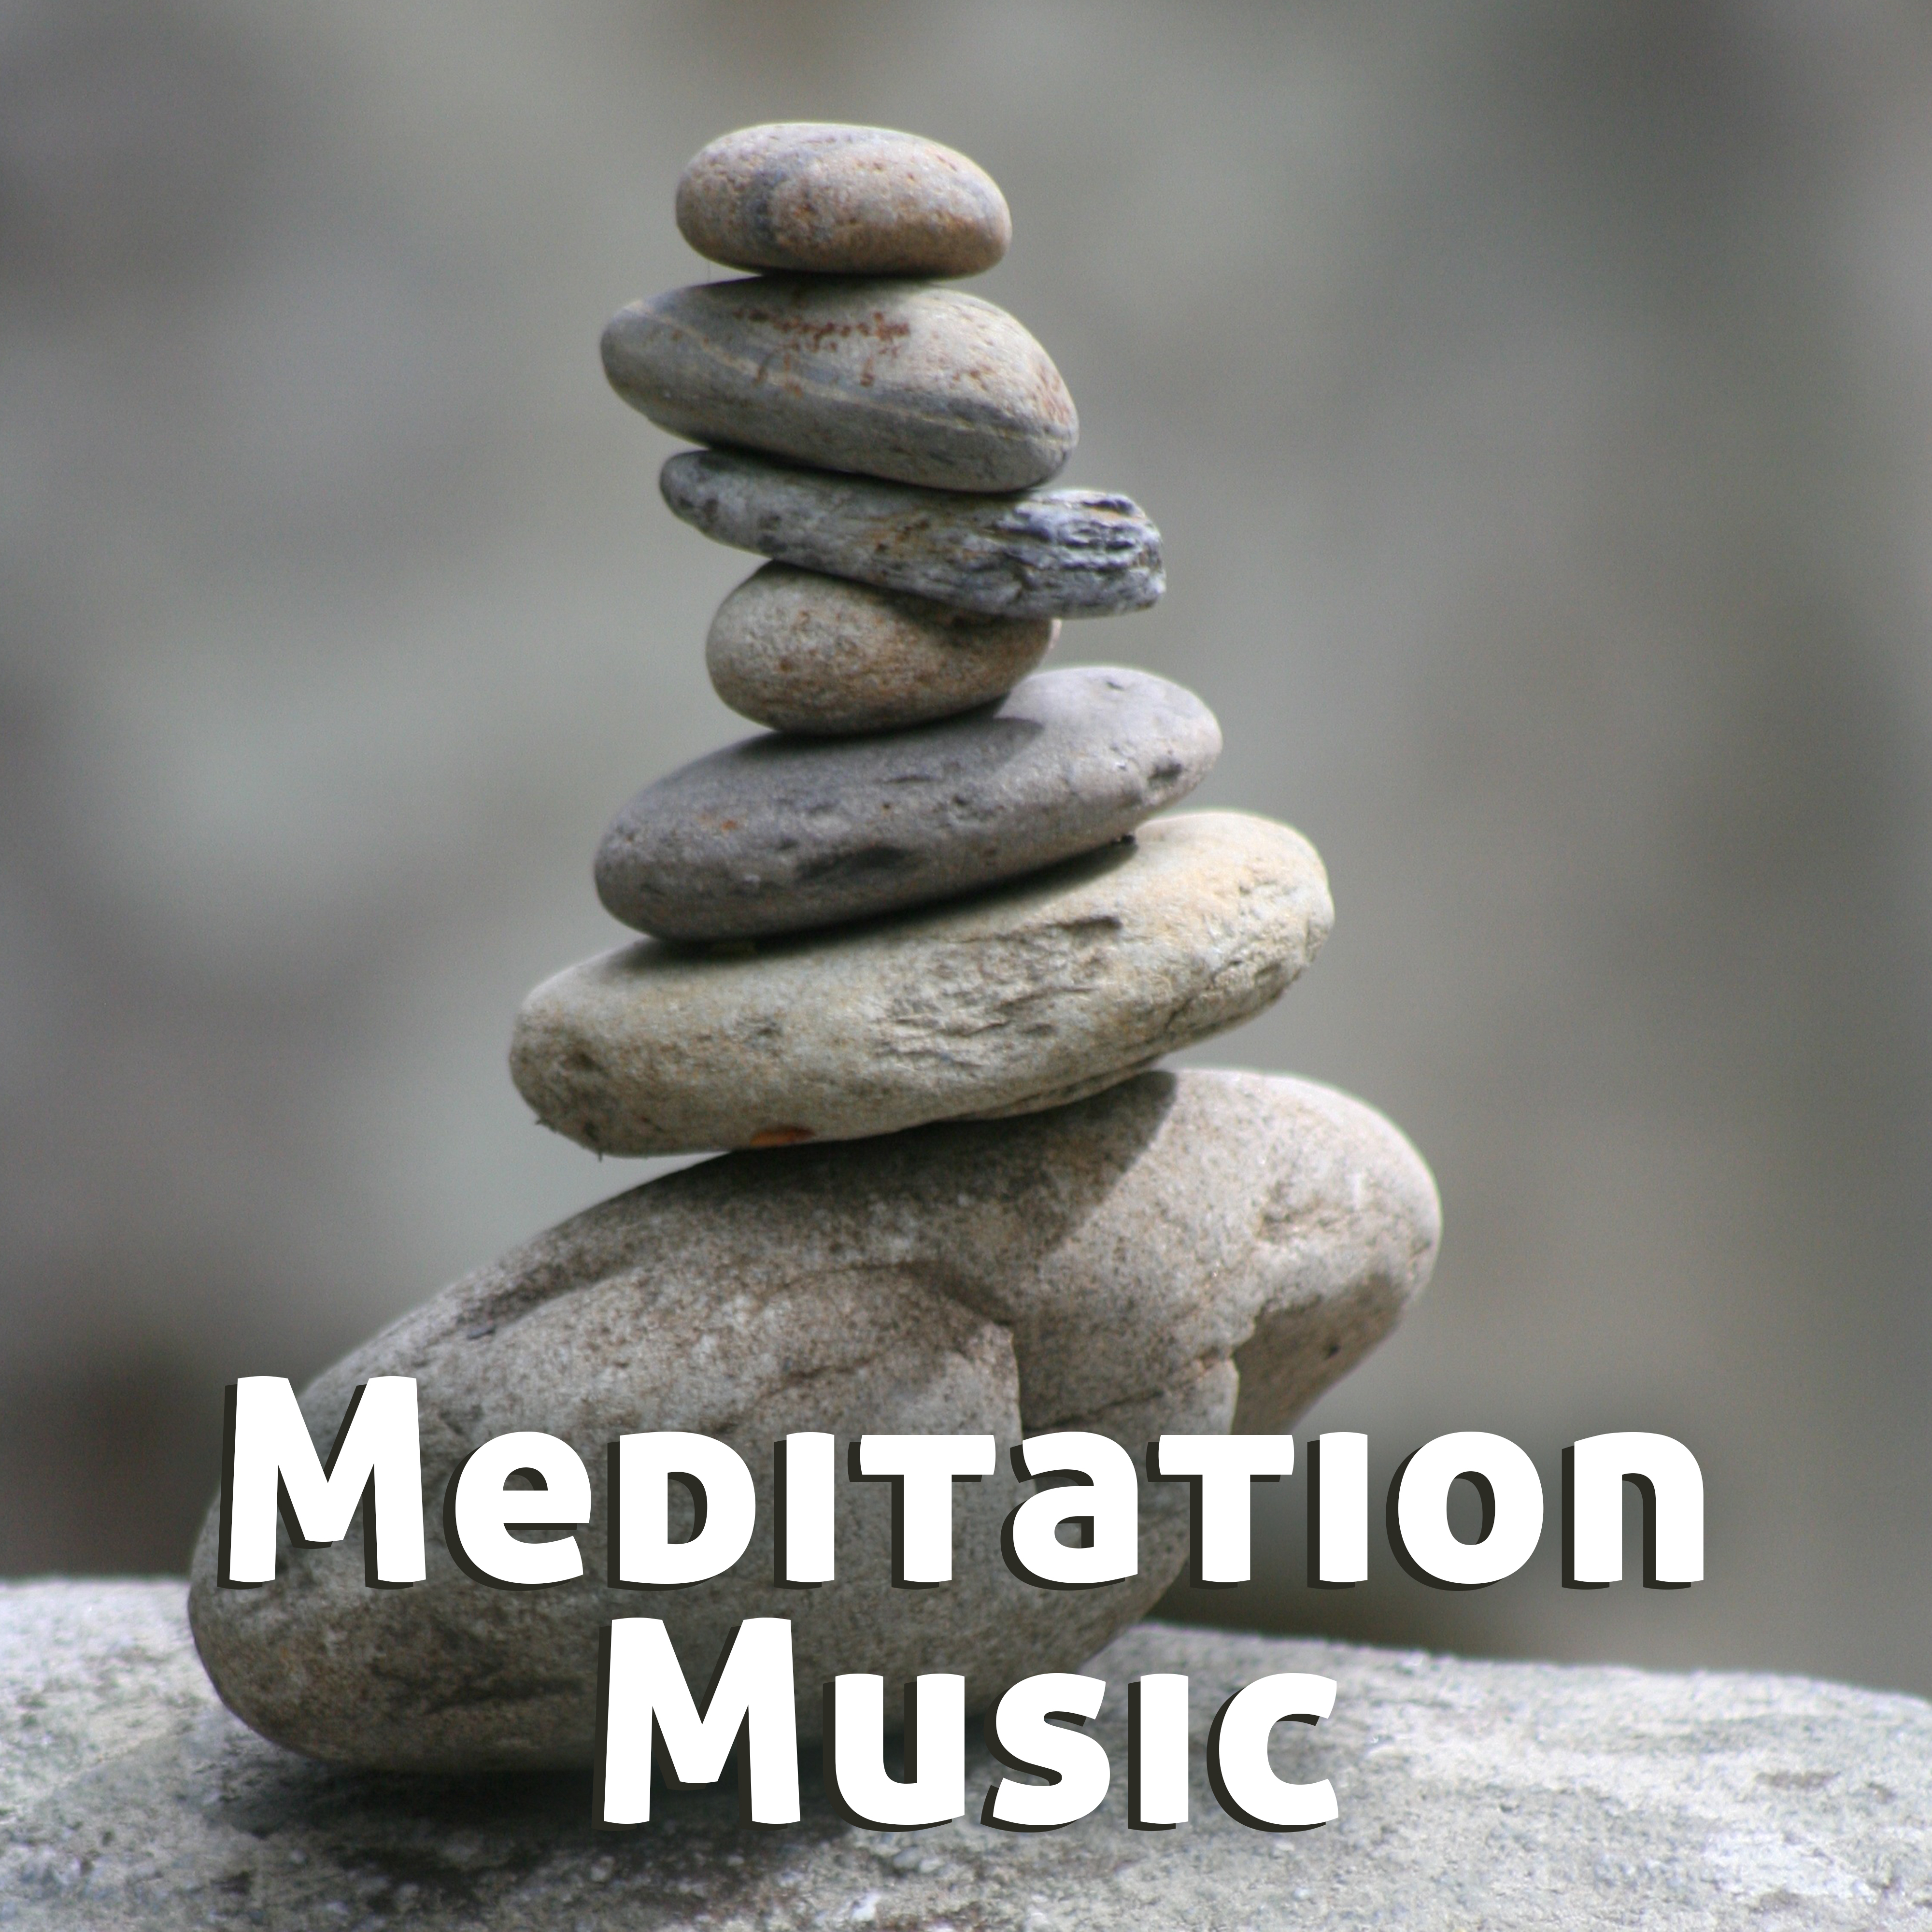 Meditation Music  Sounds of Yoga, Healing Music to Calm Down, Stress Relief, Pure Relaxation, Deep Concentration, Peaceful Mind